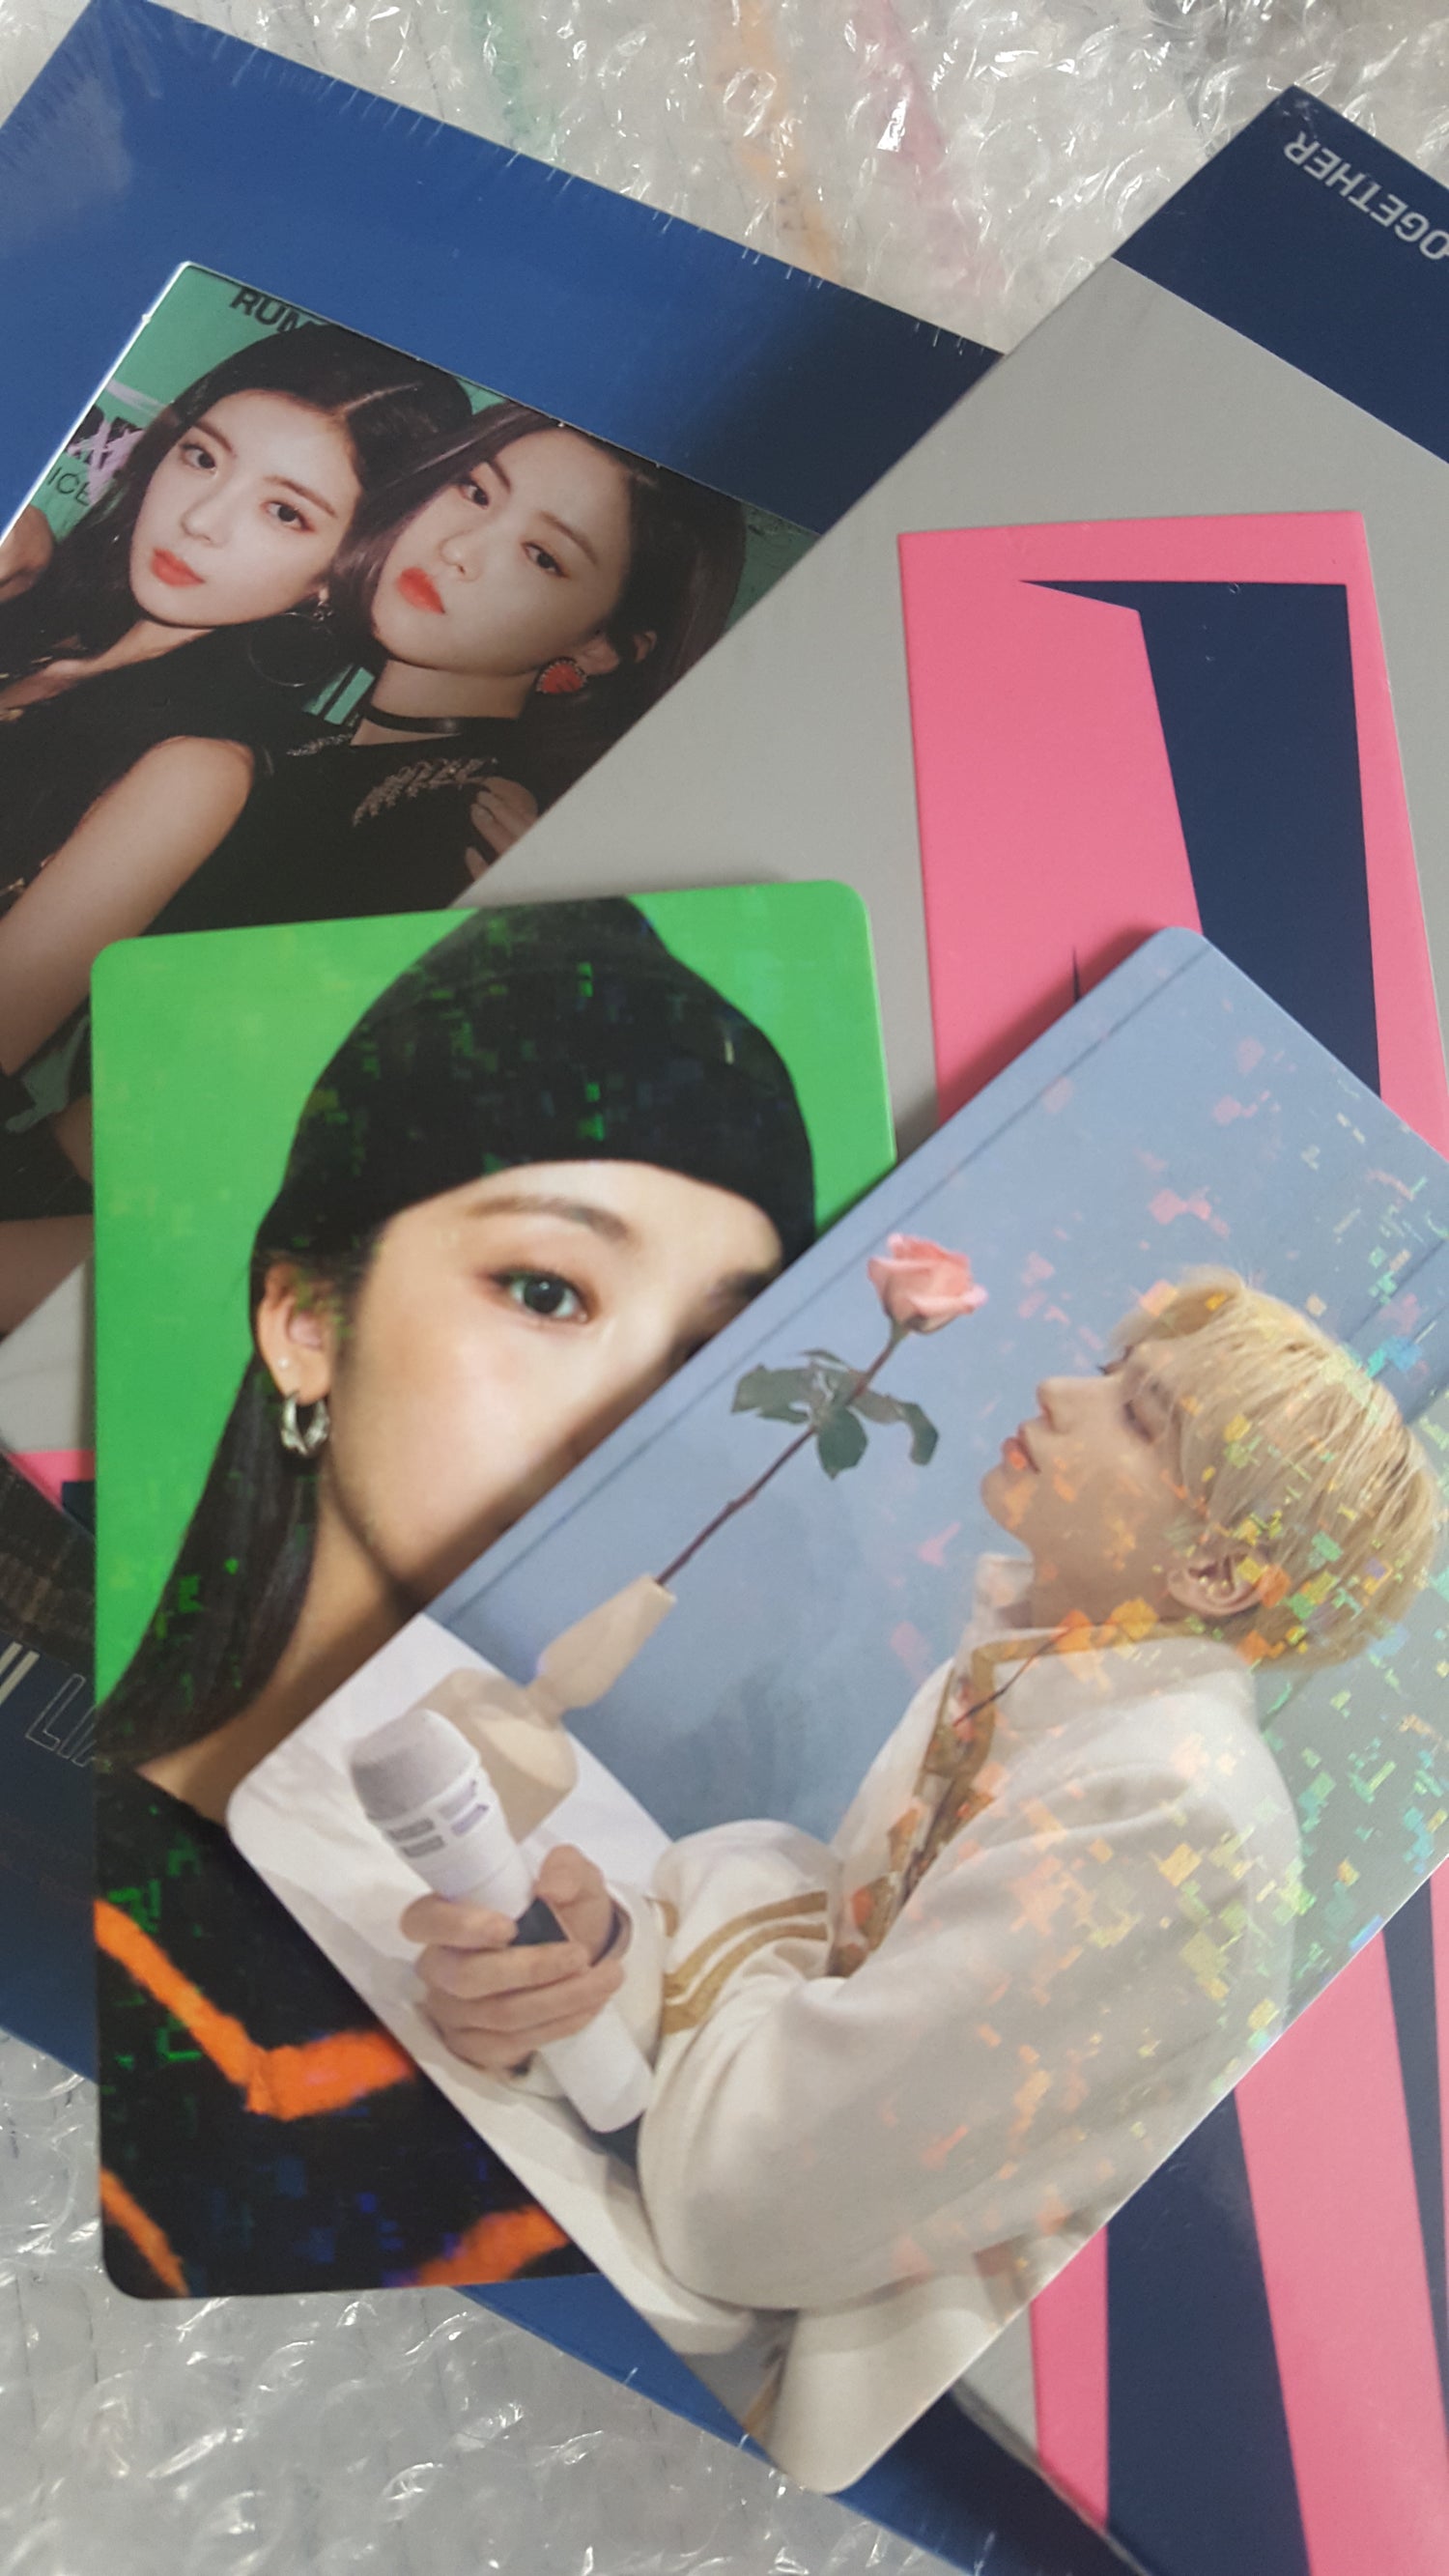 Photo cards, postcards, photos and posters